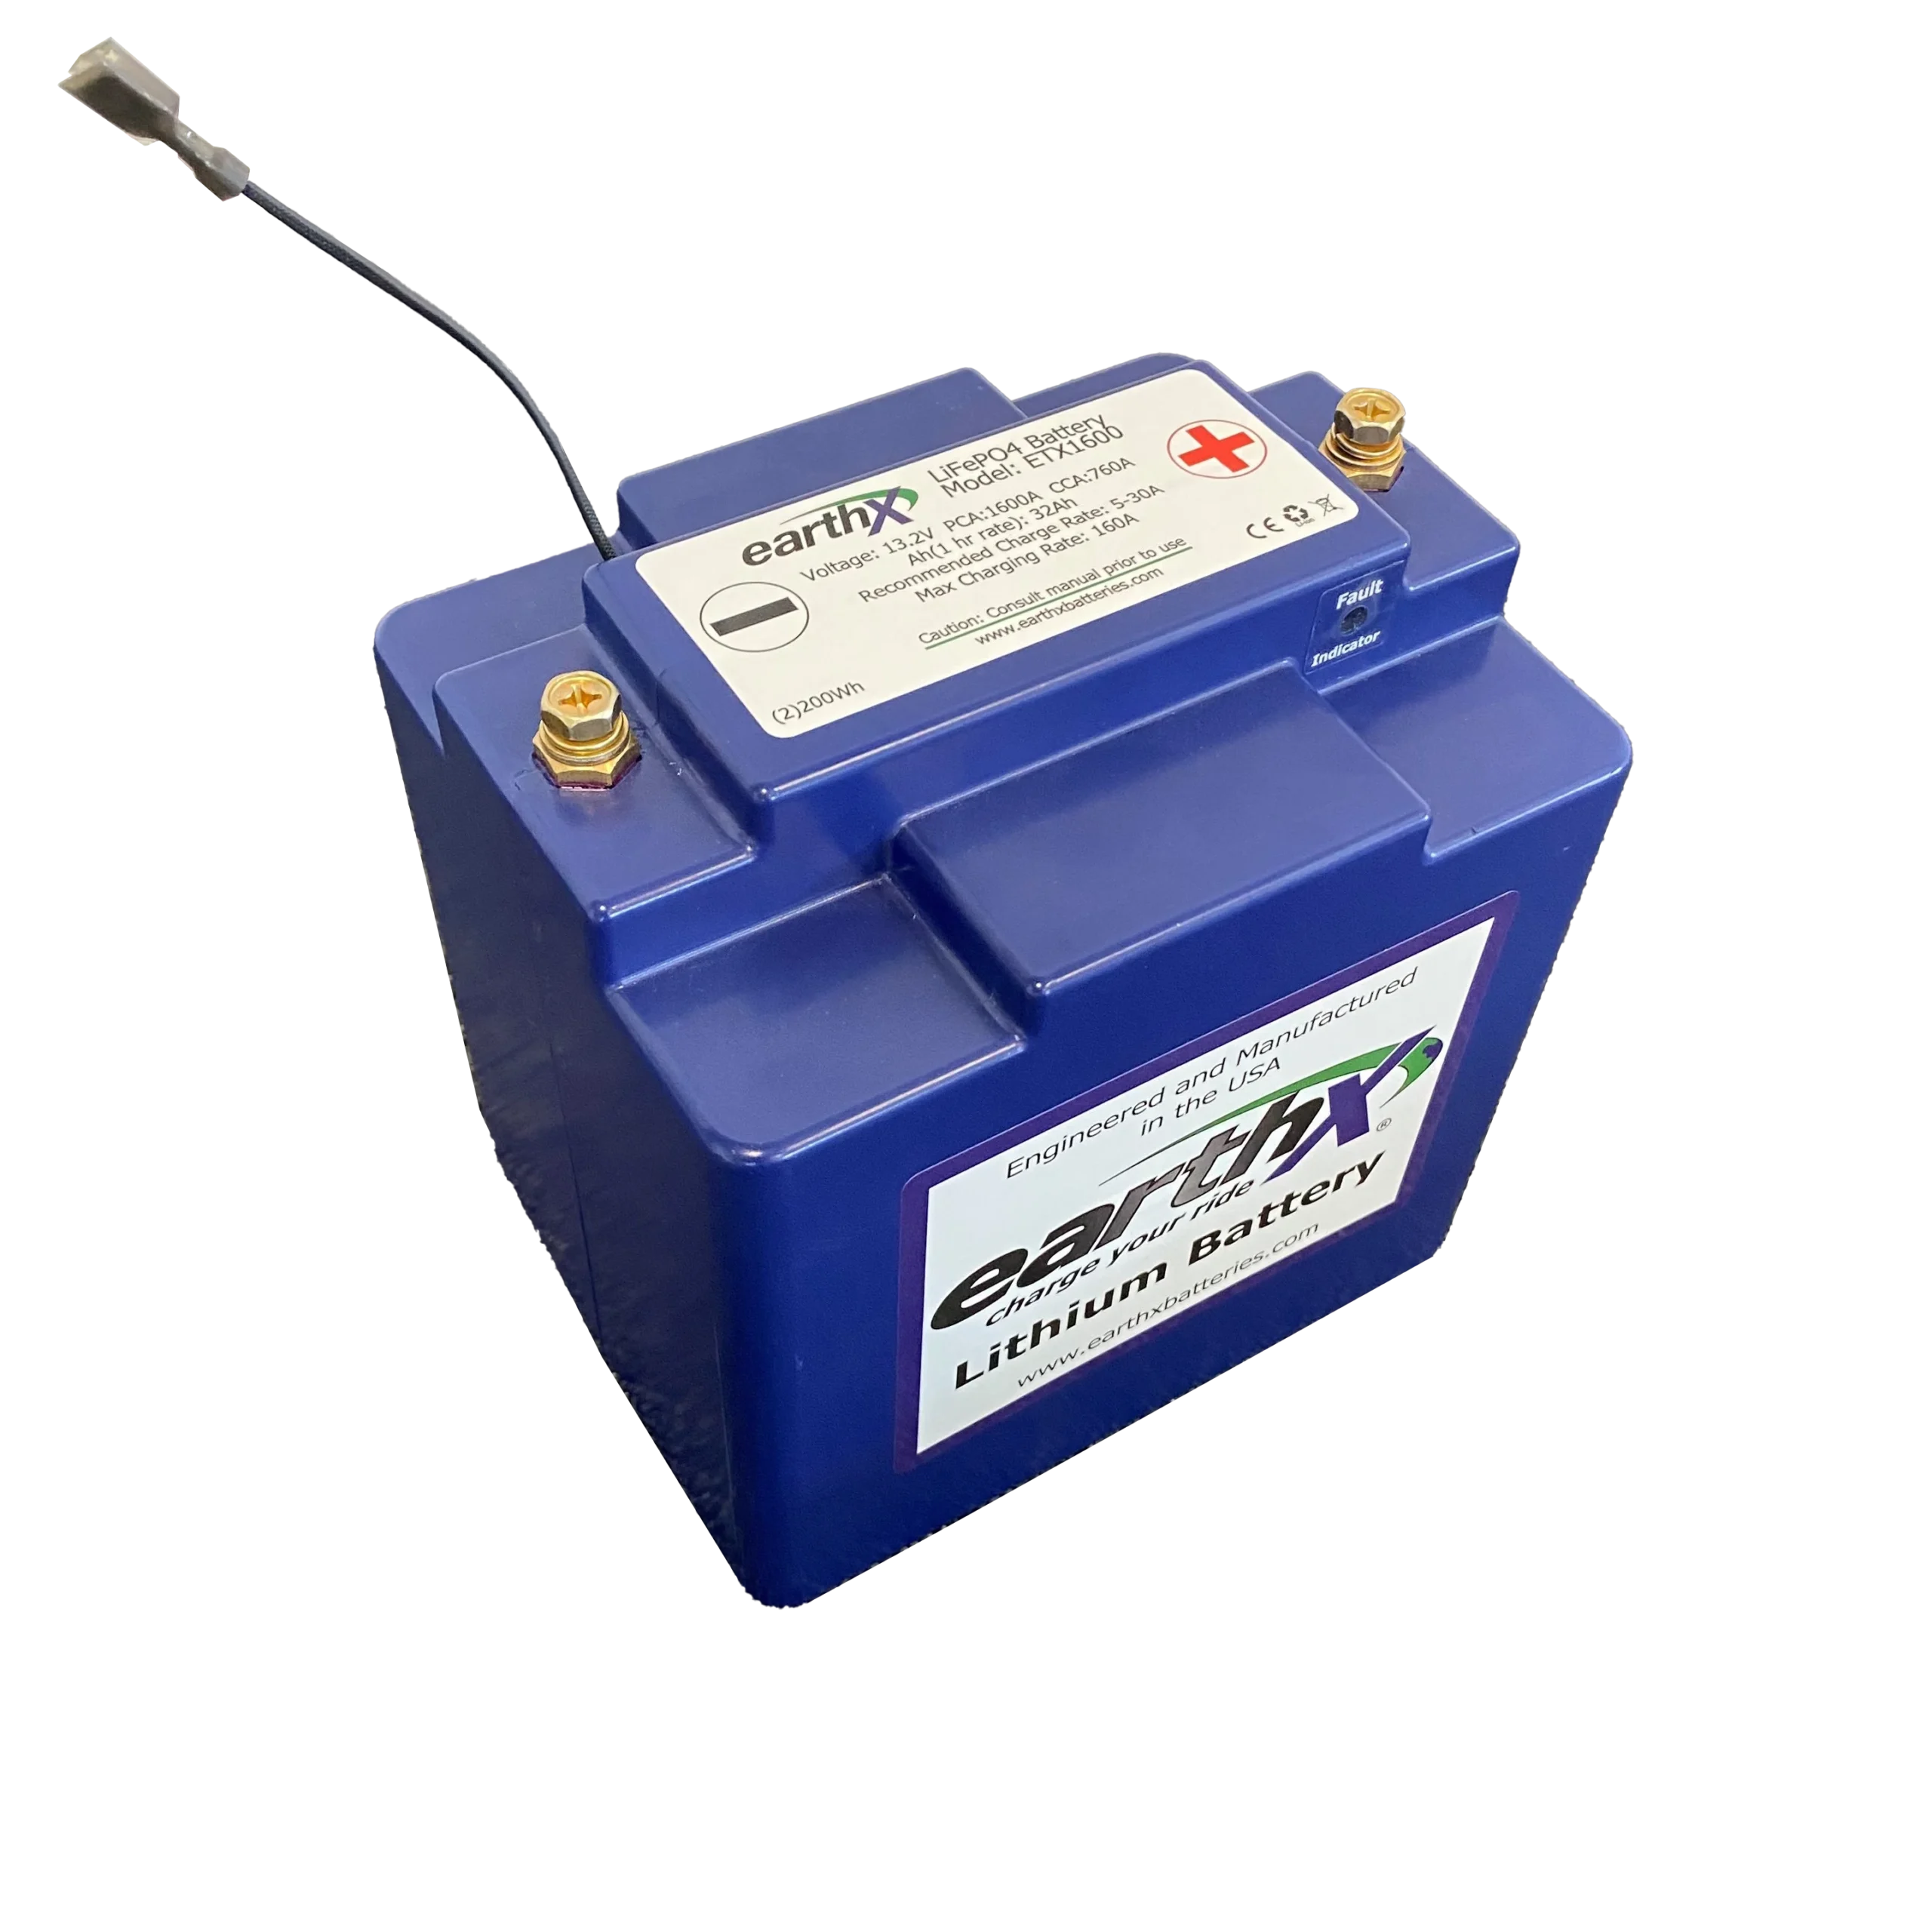 ETX1600, 12V LiFePo4 battery with 1600PCA